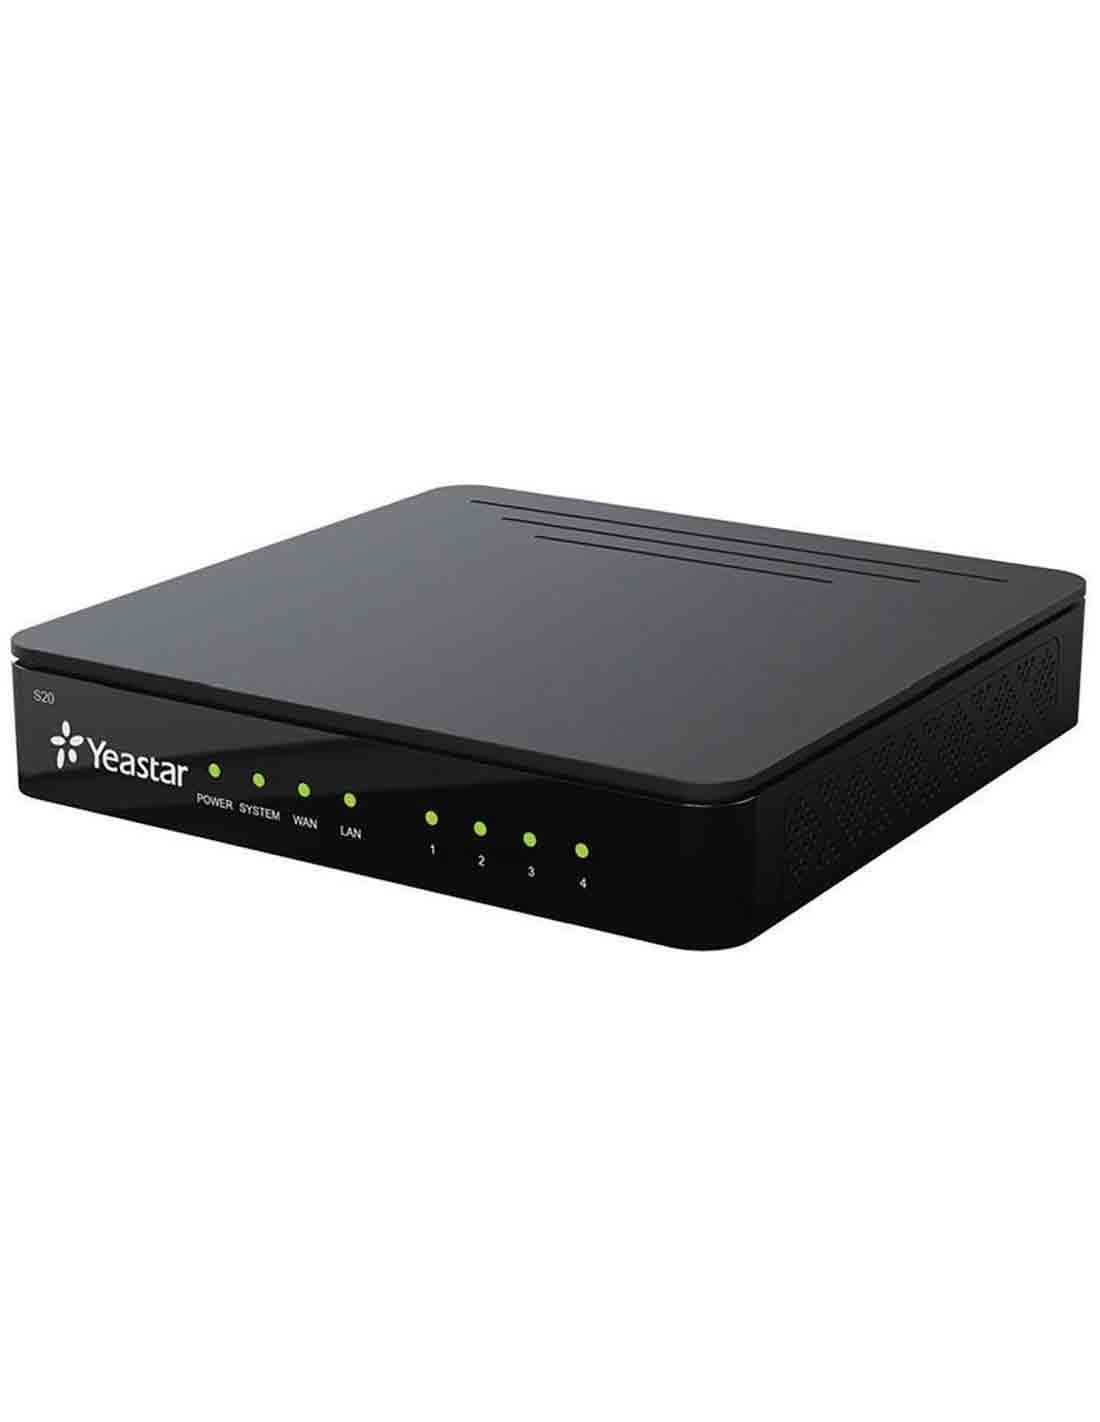 Yeastar S20 MyPBX 4-Port IP PBX (20 Users) at a Cheap Price in Dubai Online Store